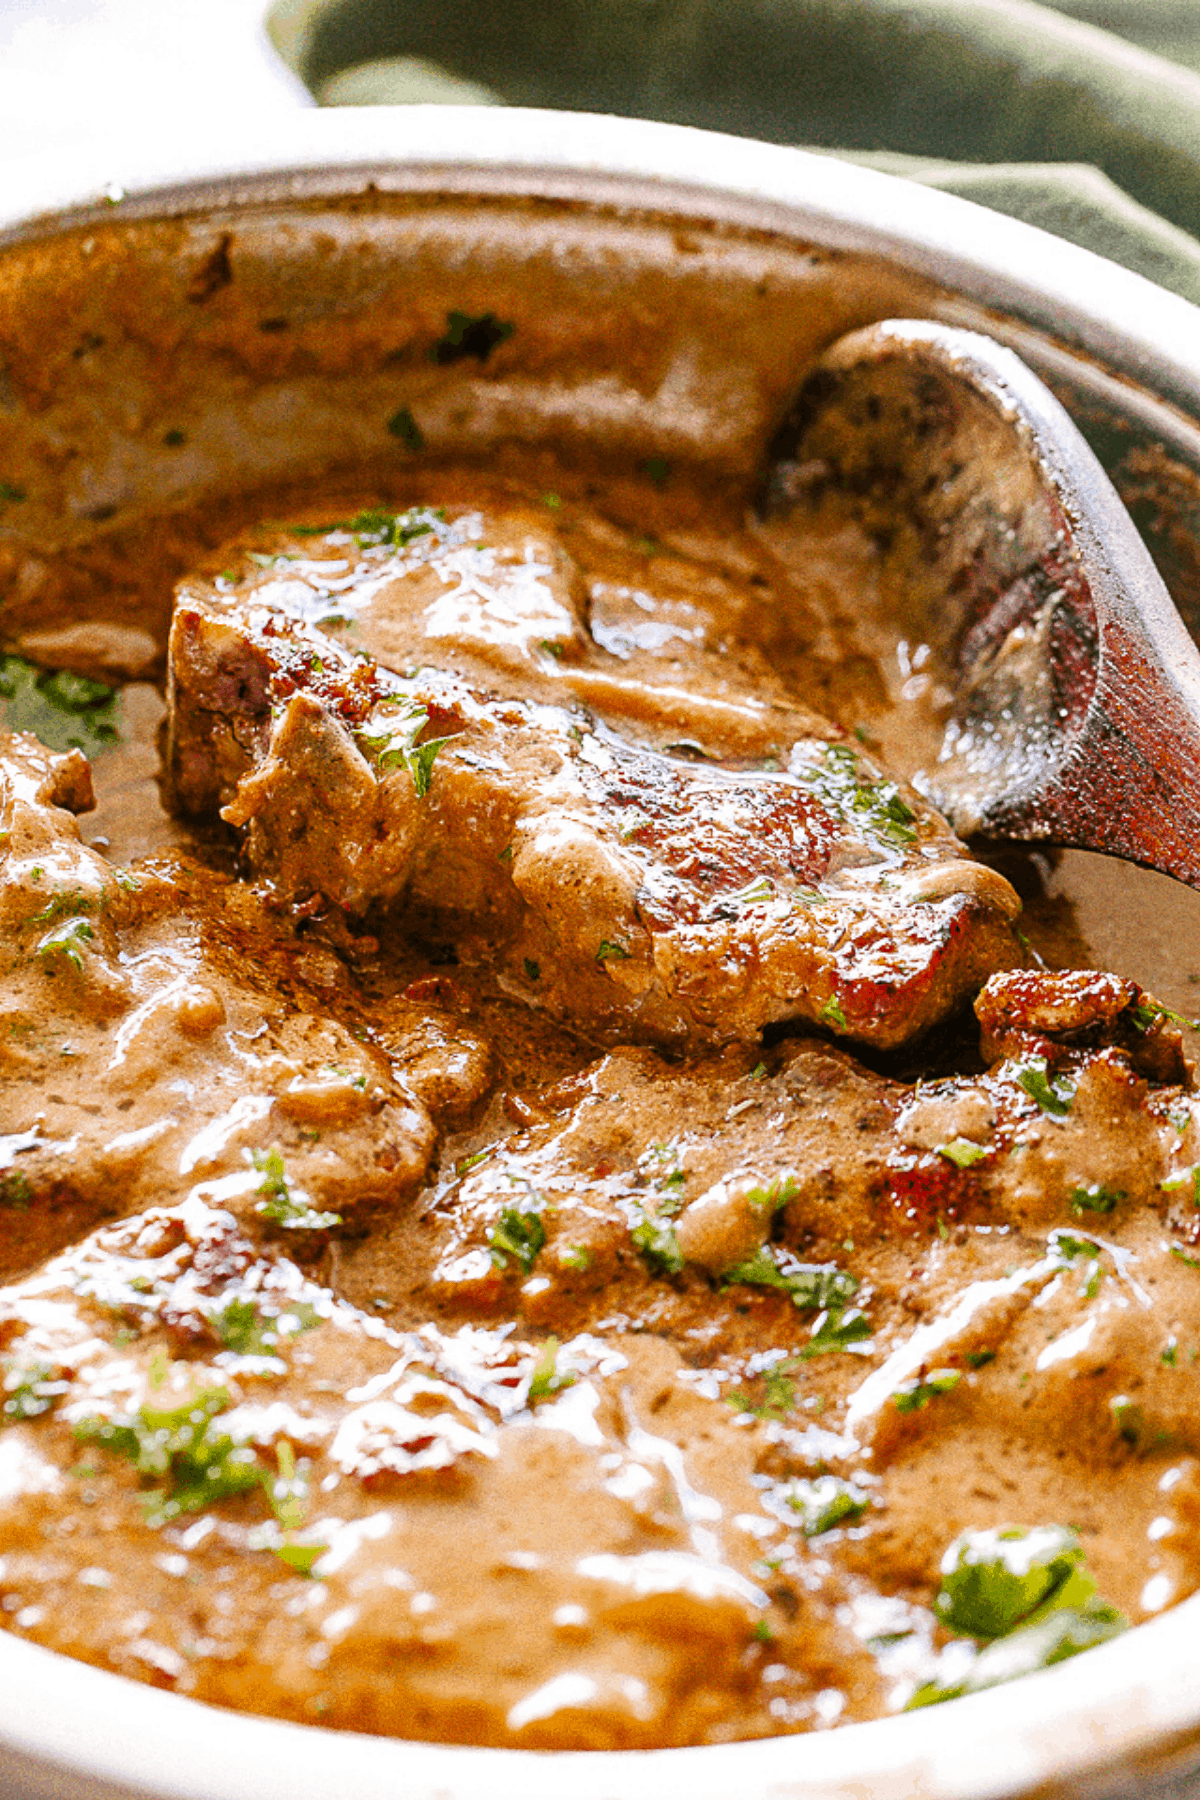 A stainless steel skillet with pork chops, gravy, and a wooden spoon.